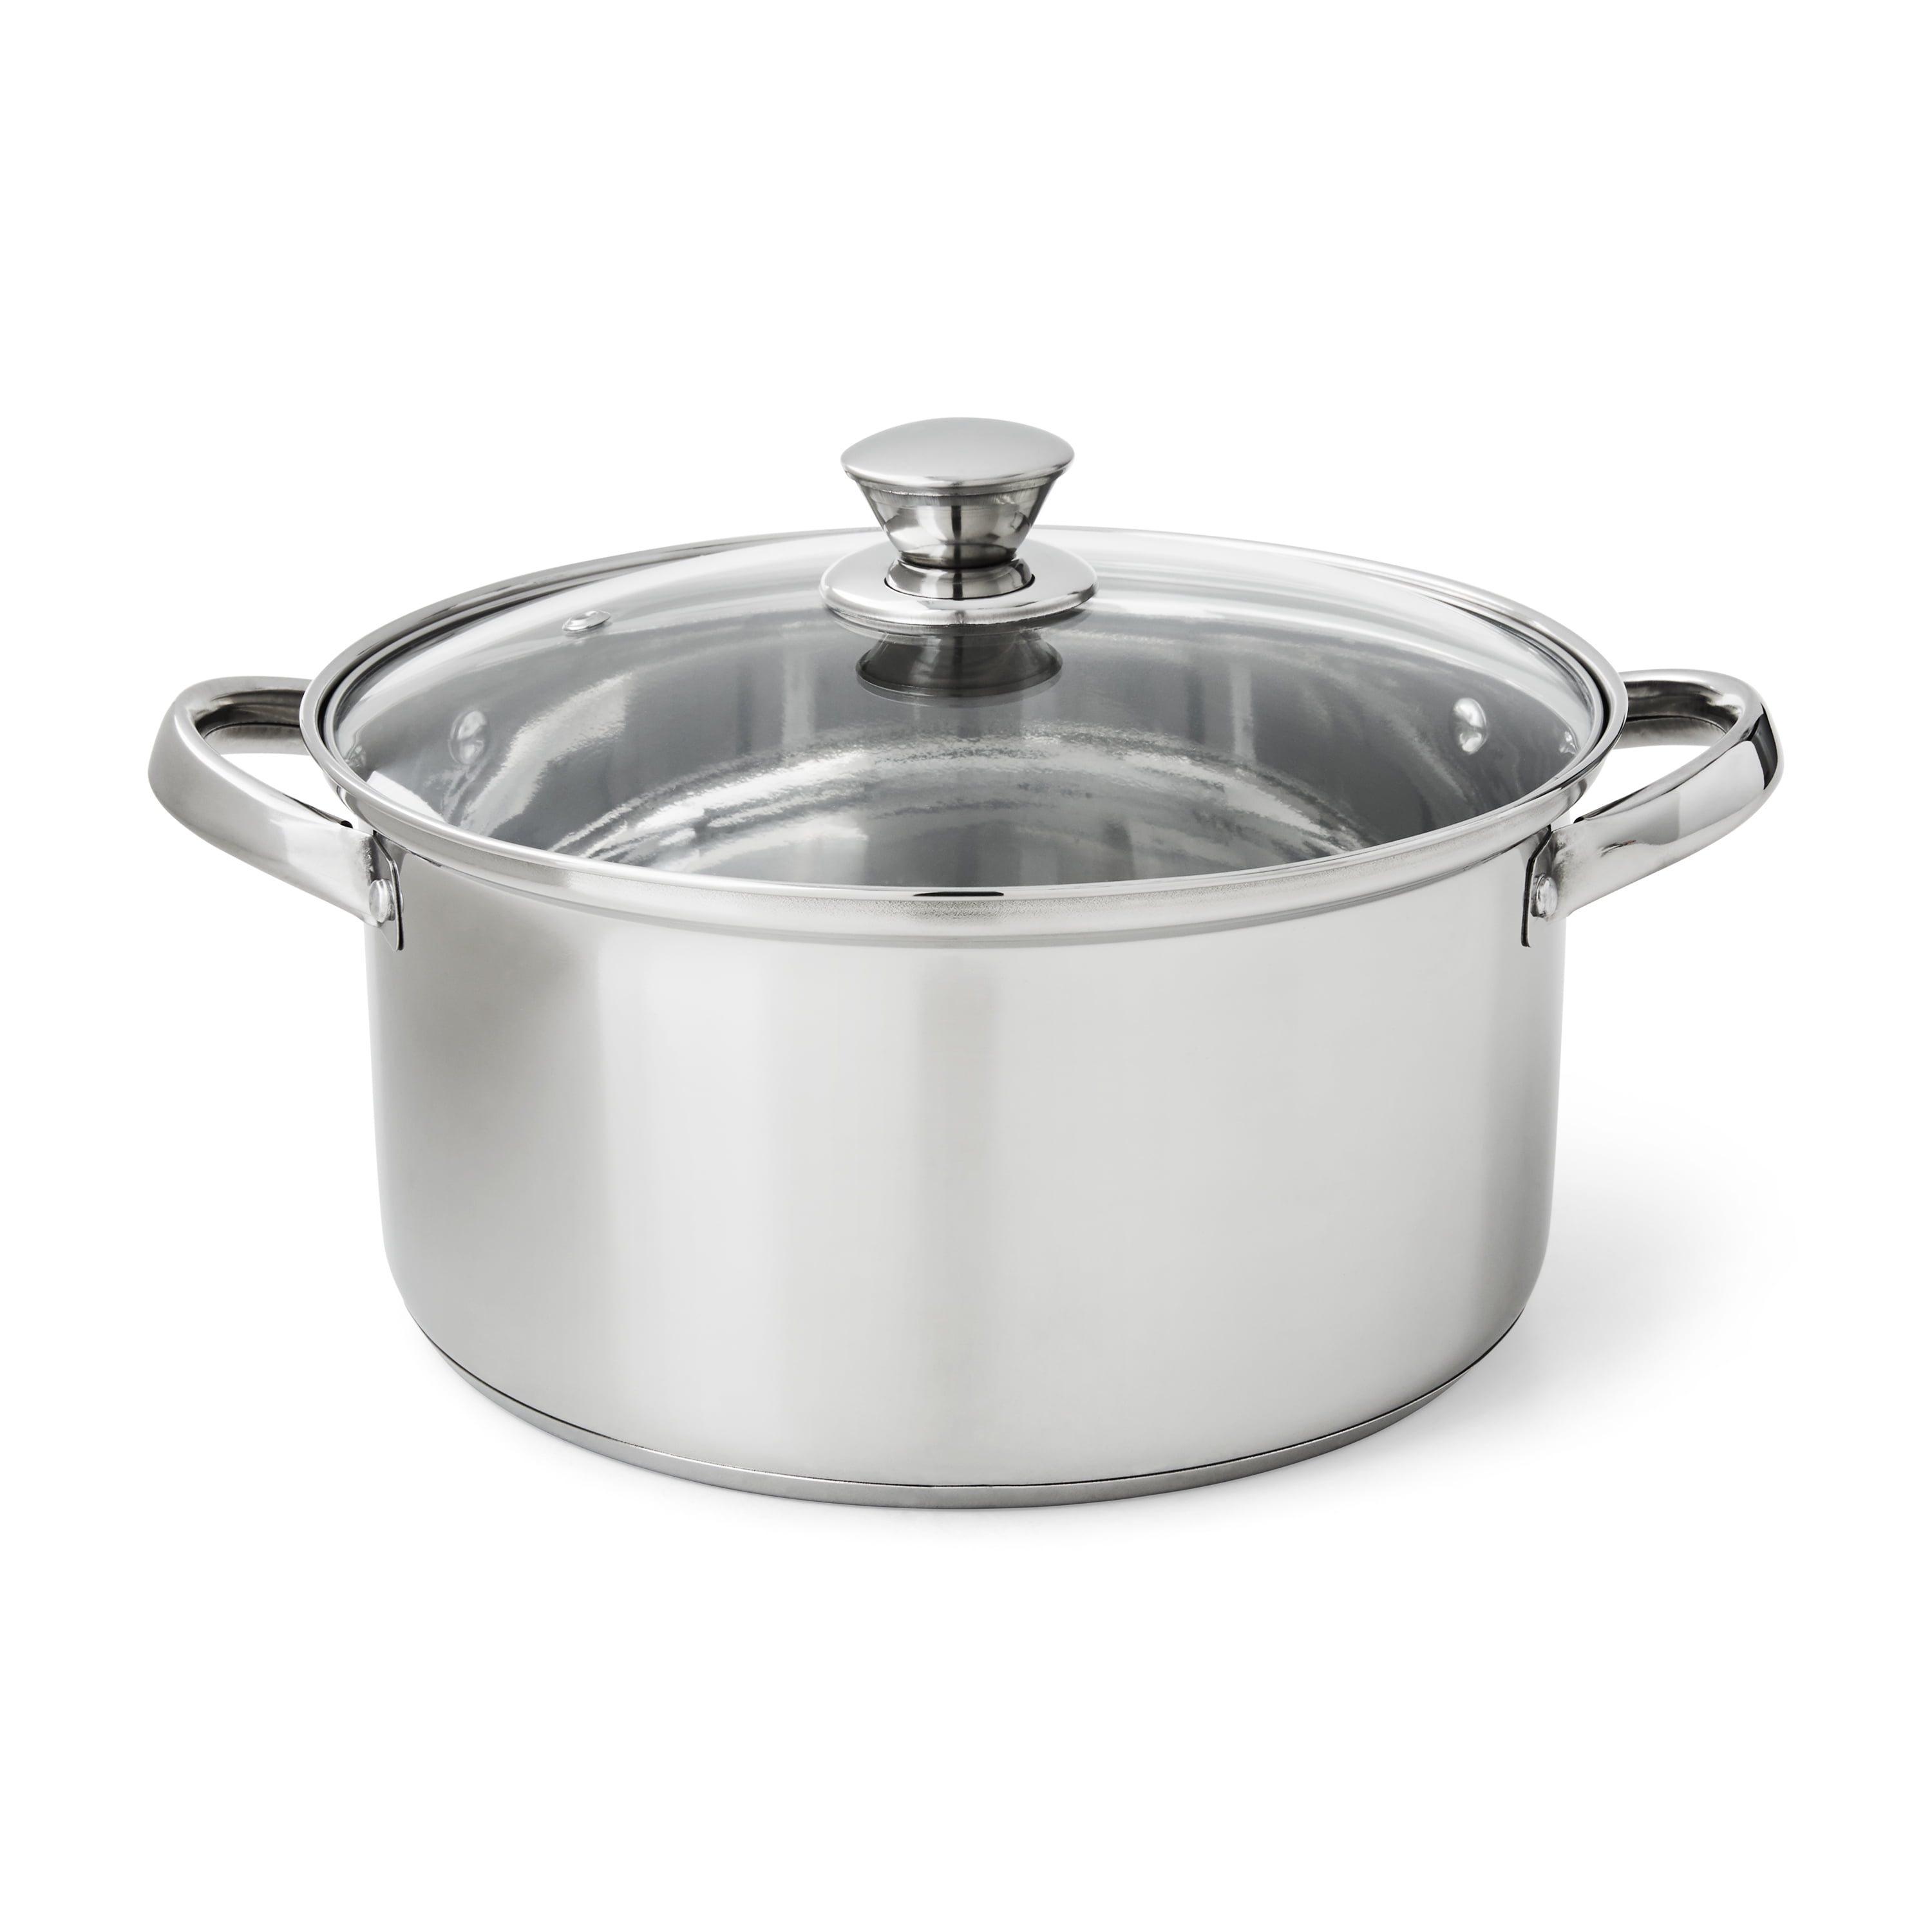 Mainstays Stainless Steel Covered Dutch Oven, 5-Quart